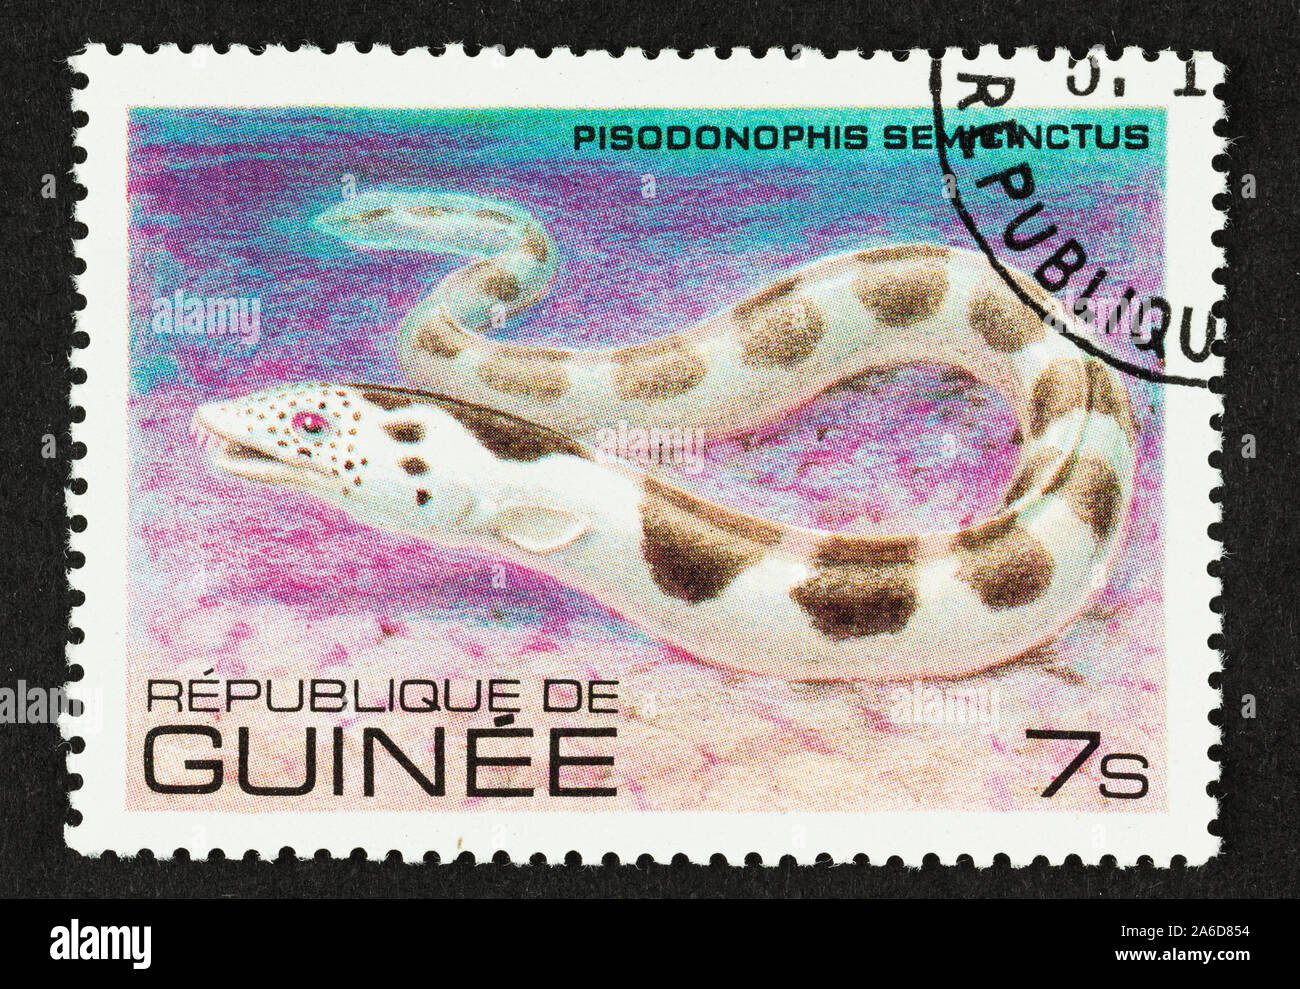 Close up of  colourful used postage stamp from the Republic of Guinea featuring subtropical eel: Pisodonophis semicinctus. Stock Photo